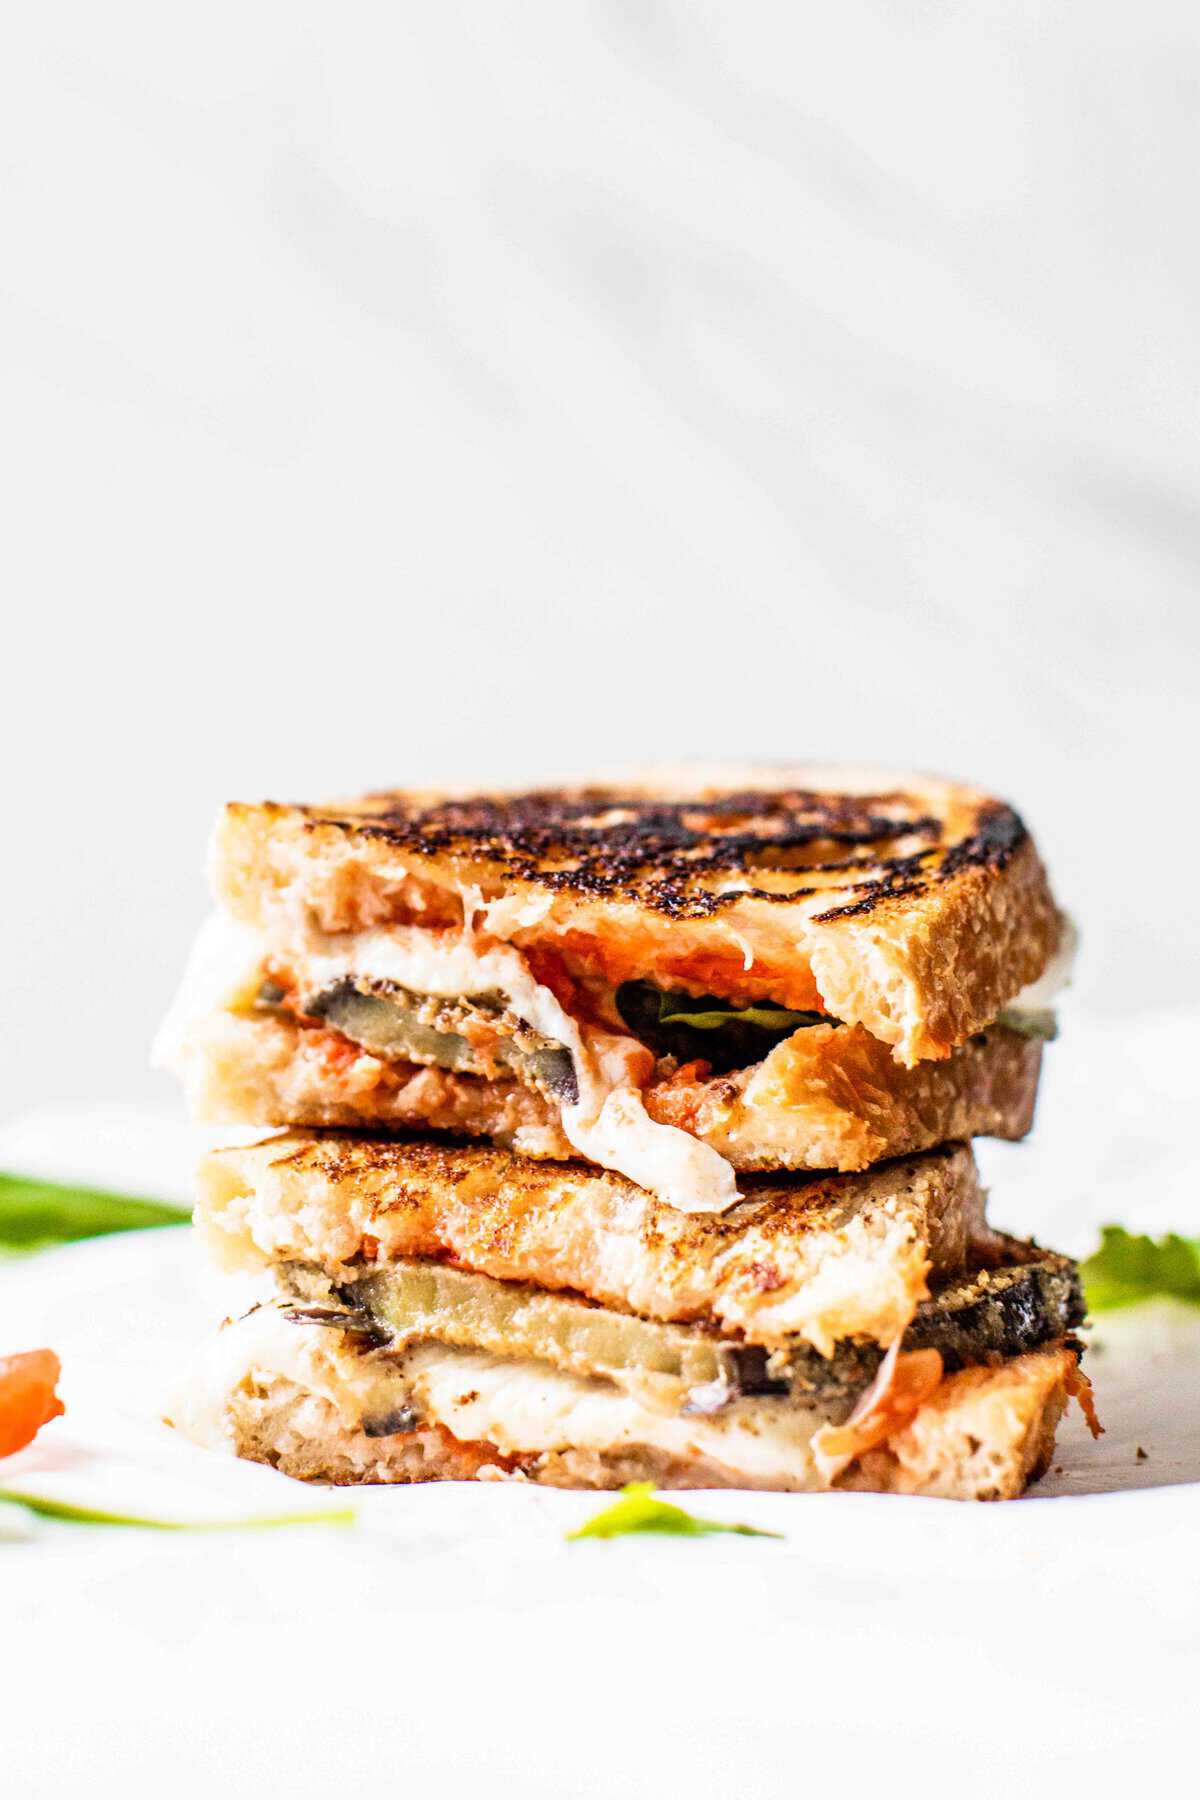 If you're looking for an alternative to eggplant parmesan, this eggplant parmesan SANDWICH is it! #eggplant #eggplantparmesan #eggplantrecipe #eggplantrecipes #eggplantideas